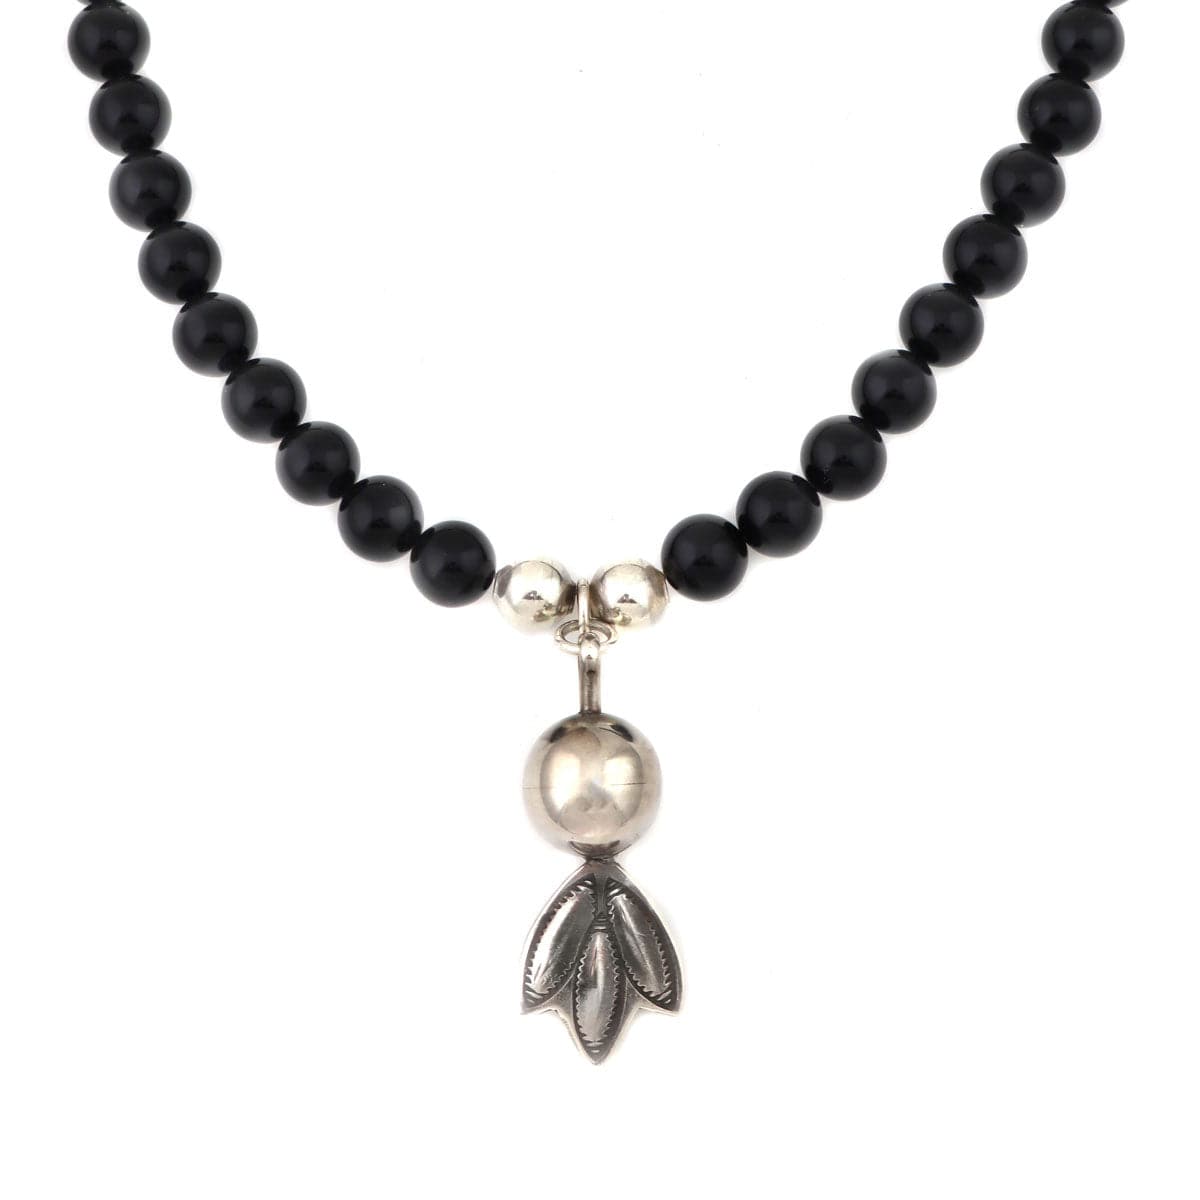 Miramontes - Necklace on Onyx Beads with a Large Silver "Anniversary" Blossom, 16" Length (J91305-1221-021)1